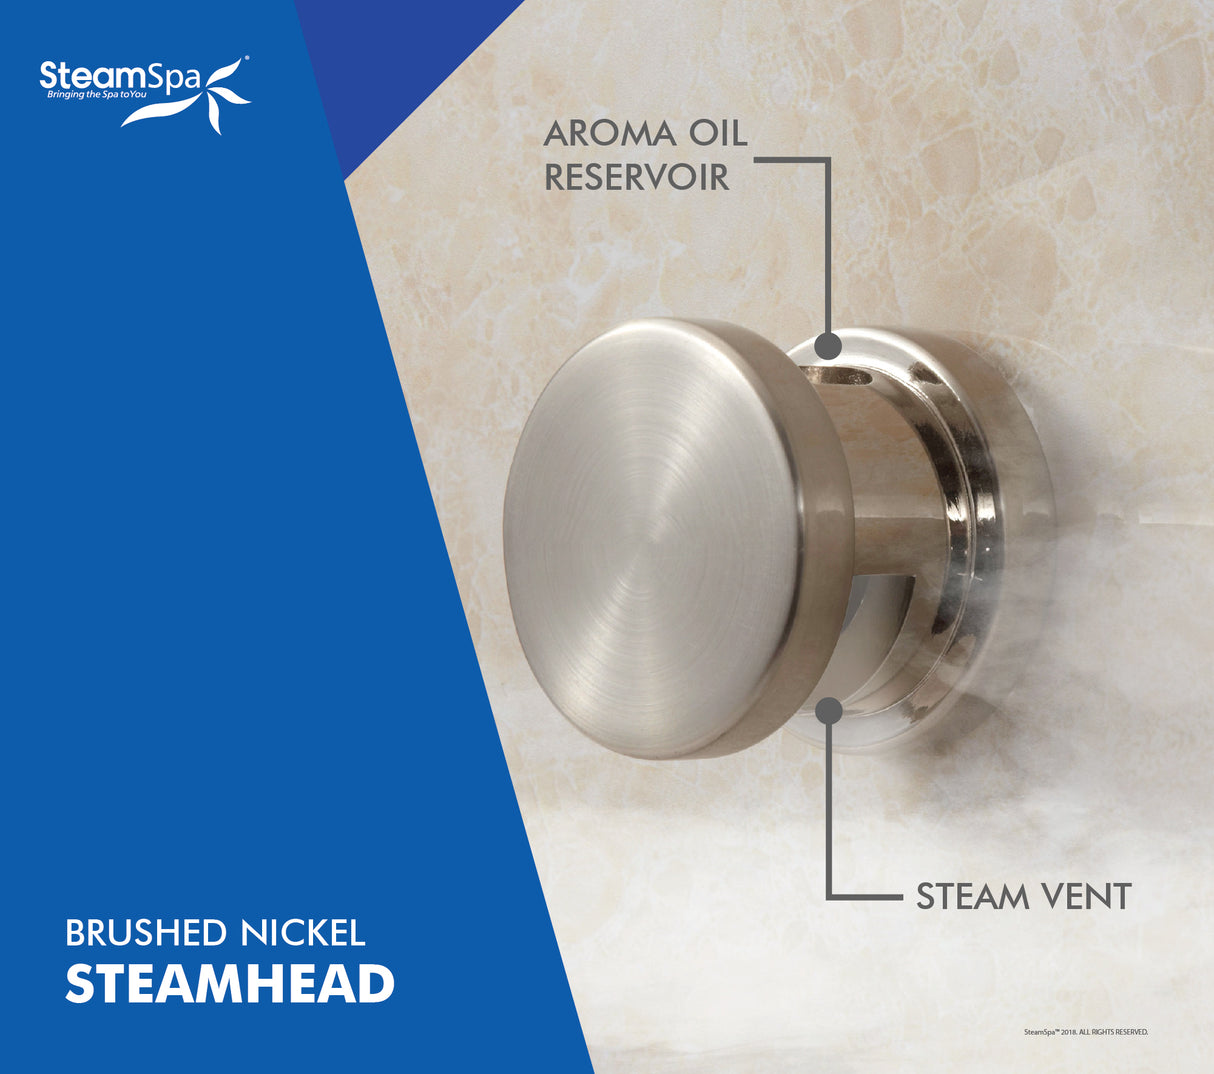 SteamSpa Executive 7.5 KW QuickStart Acu-Steam Bath Generator Package with Built-in Auto Drain and Install Kit in Brushed Nickel | Steam Generator Kit with Dual Control Panel Steamhead 240V | EXT750BN-A EXT750BN-A